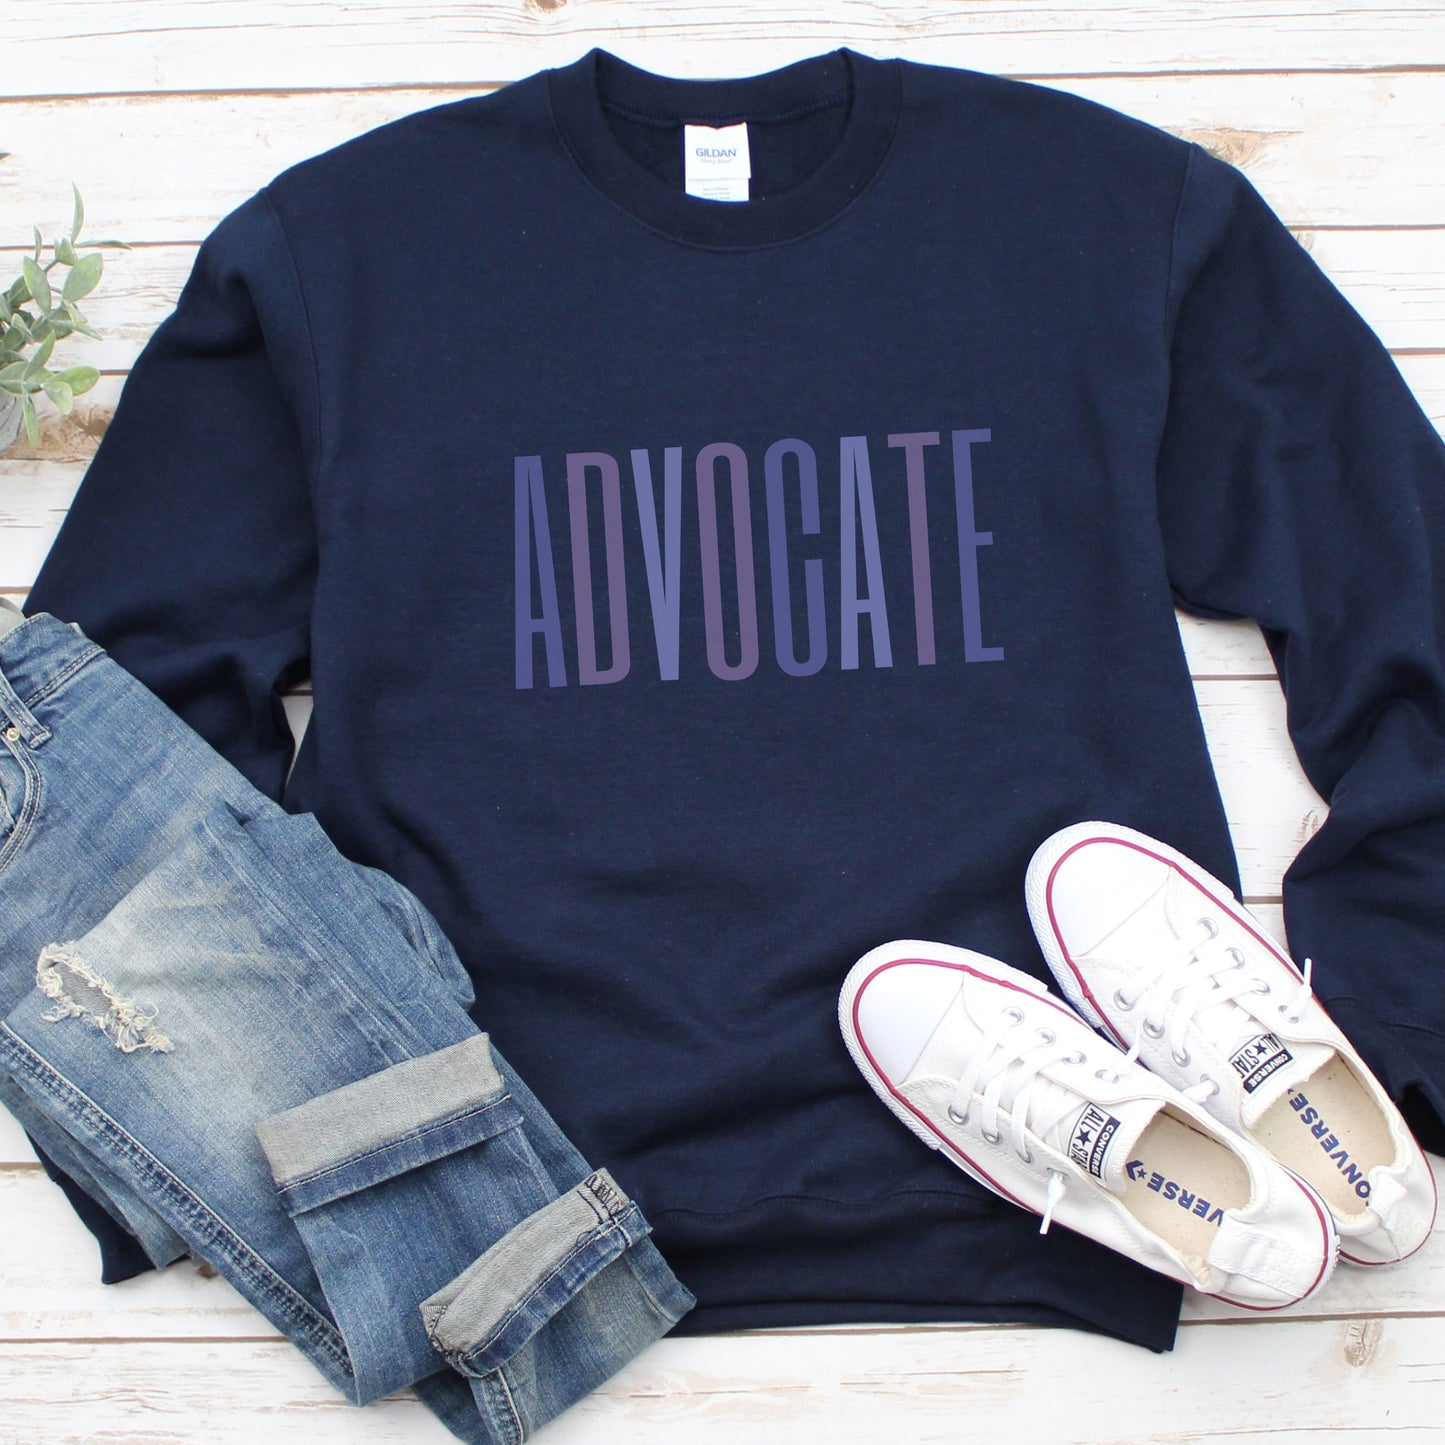 Crewneck sweatshirt with a powerful "ADVOCATE" wordmark emblazoned across the chest in varying shades of purple, symbolizing the strength and unity of domestic violence advocates. The gradient effect from deep violet to lavender adds an eye-catching touch, making this sweater a visually compelling tribute to your commitment to ending domestic abuse.